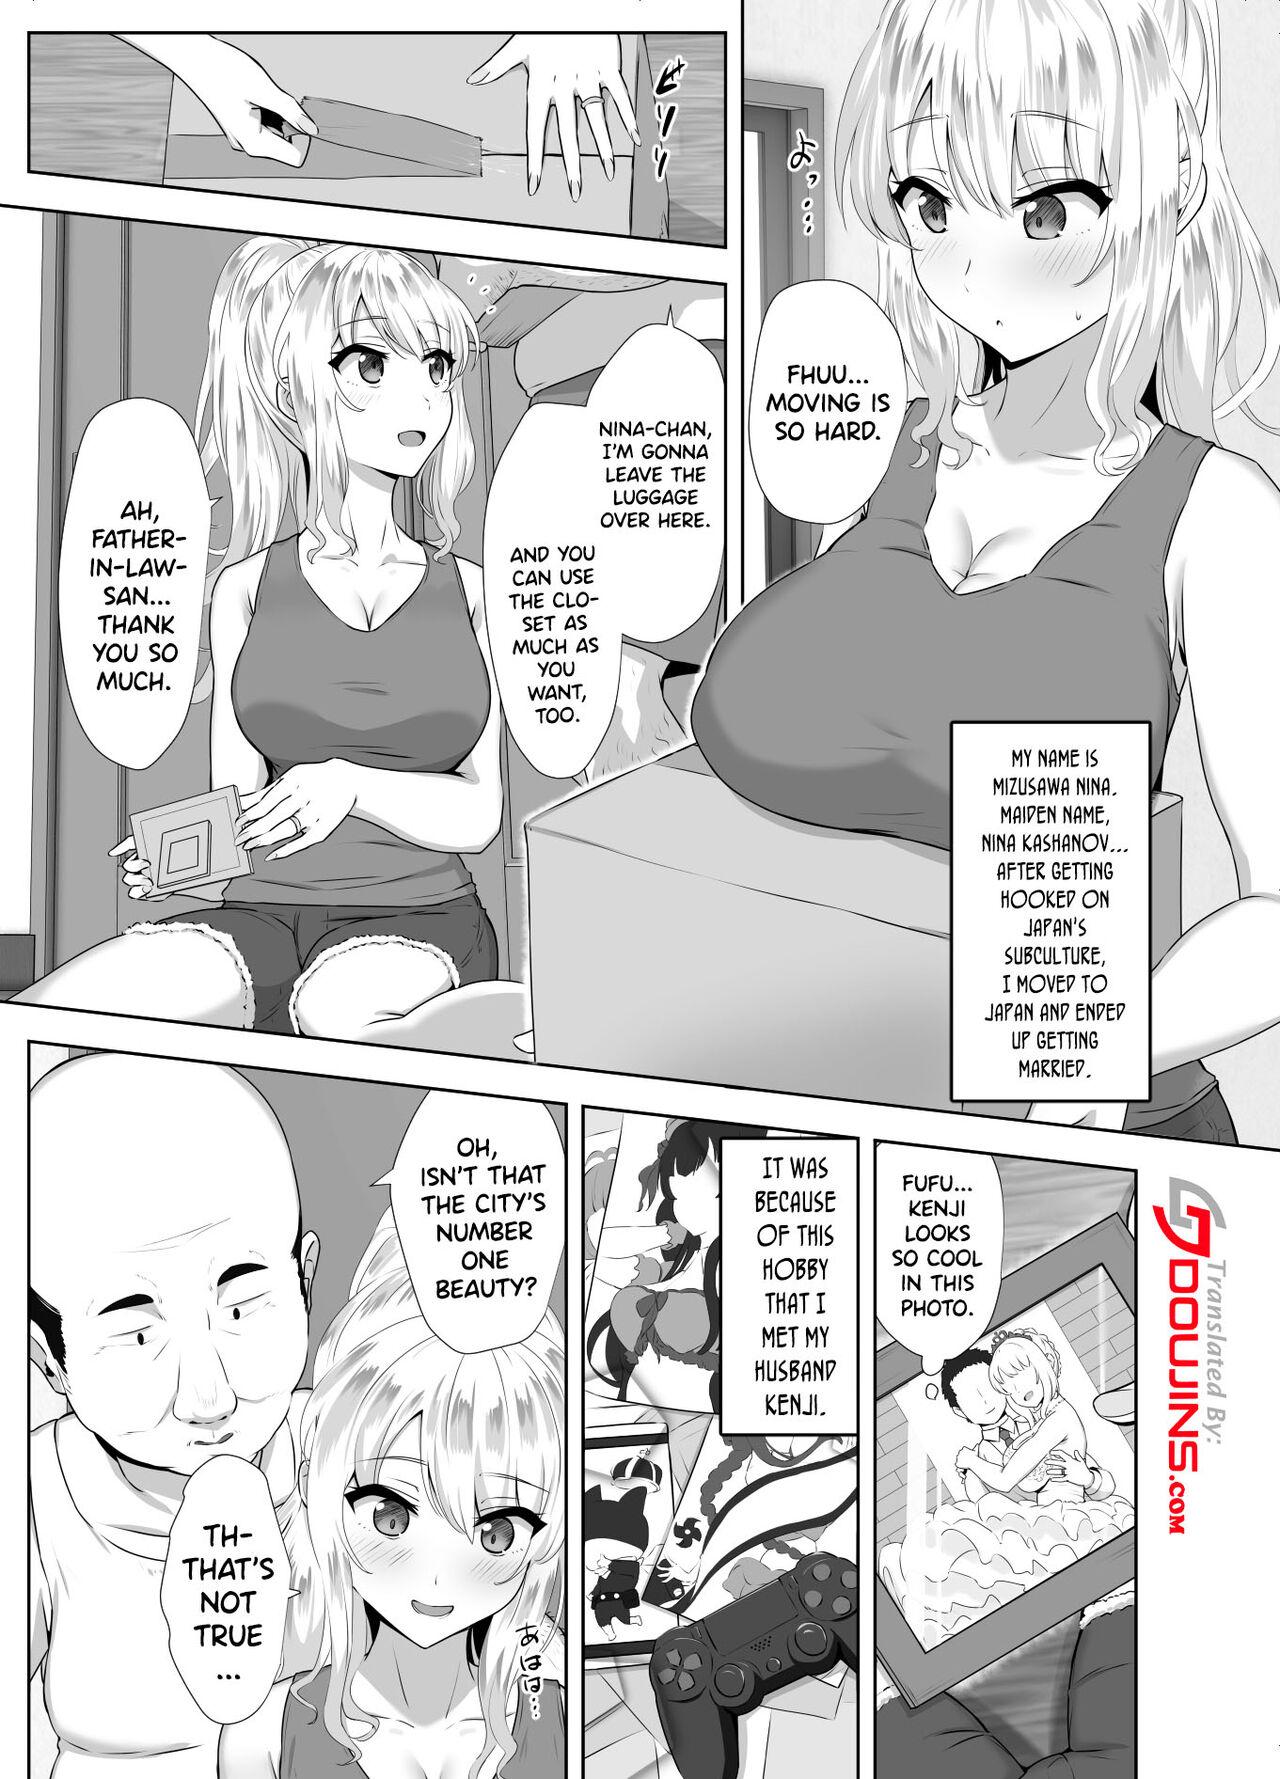 Play Russia-jin ga Osake de Nihonjin ni Makeru Wakenai Deshou? | There's No Way a Russian Could Lose to a Japanese Person In Drinking, Right? - Original Shaved Pussy - Page 2